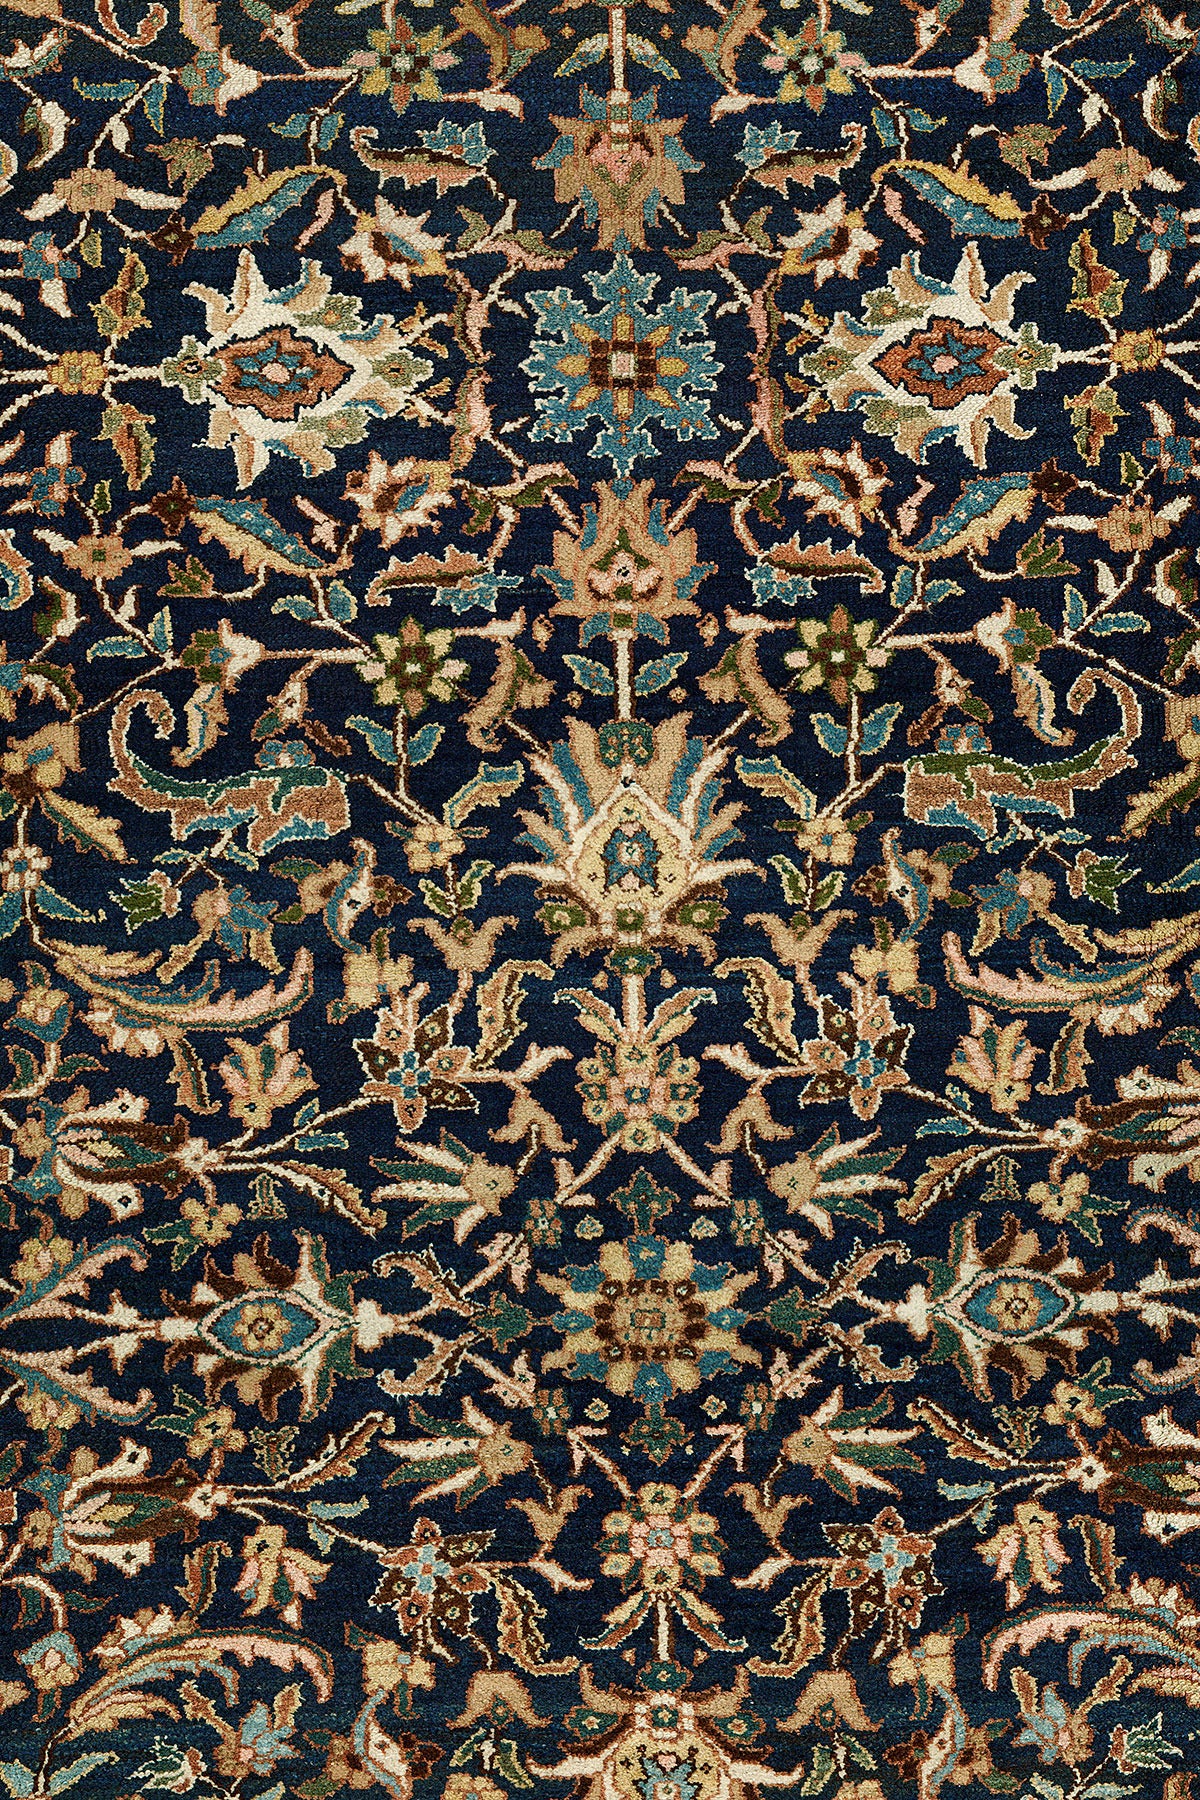 Classic early 20th century Persian Bibikabad rug.

Bibikabad rugs come from the Hamadan village region of western Iran. Meaning 